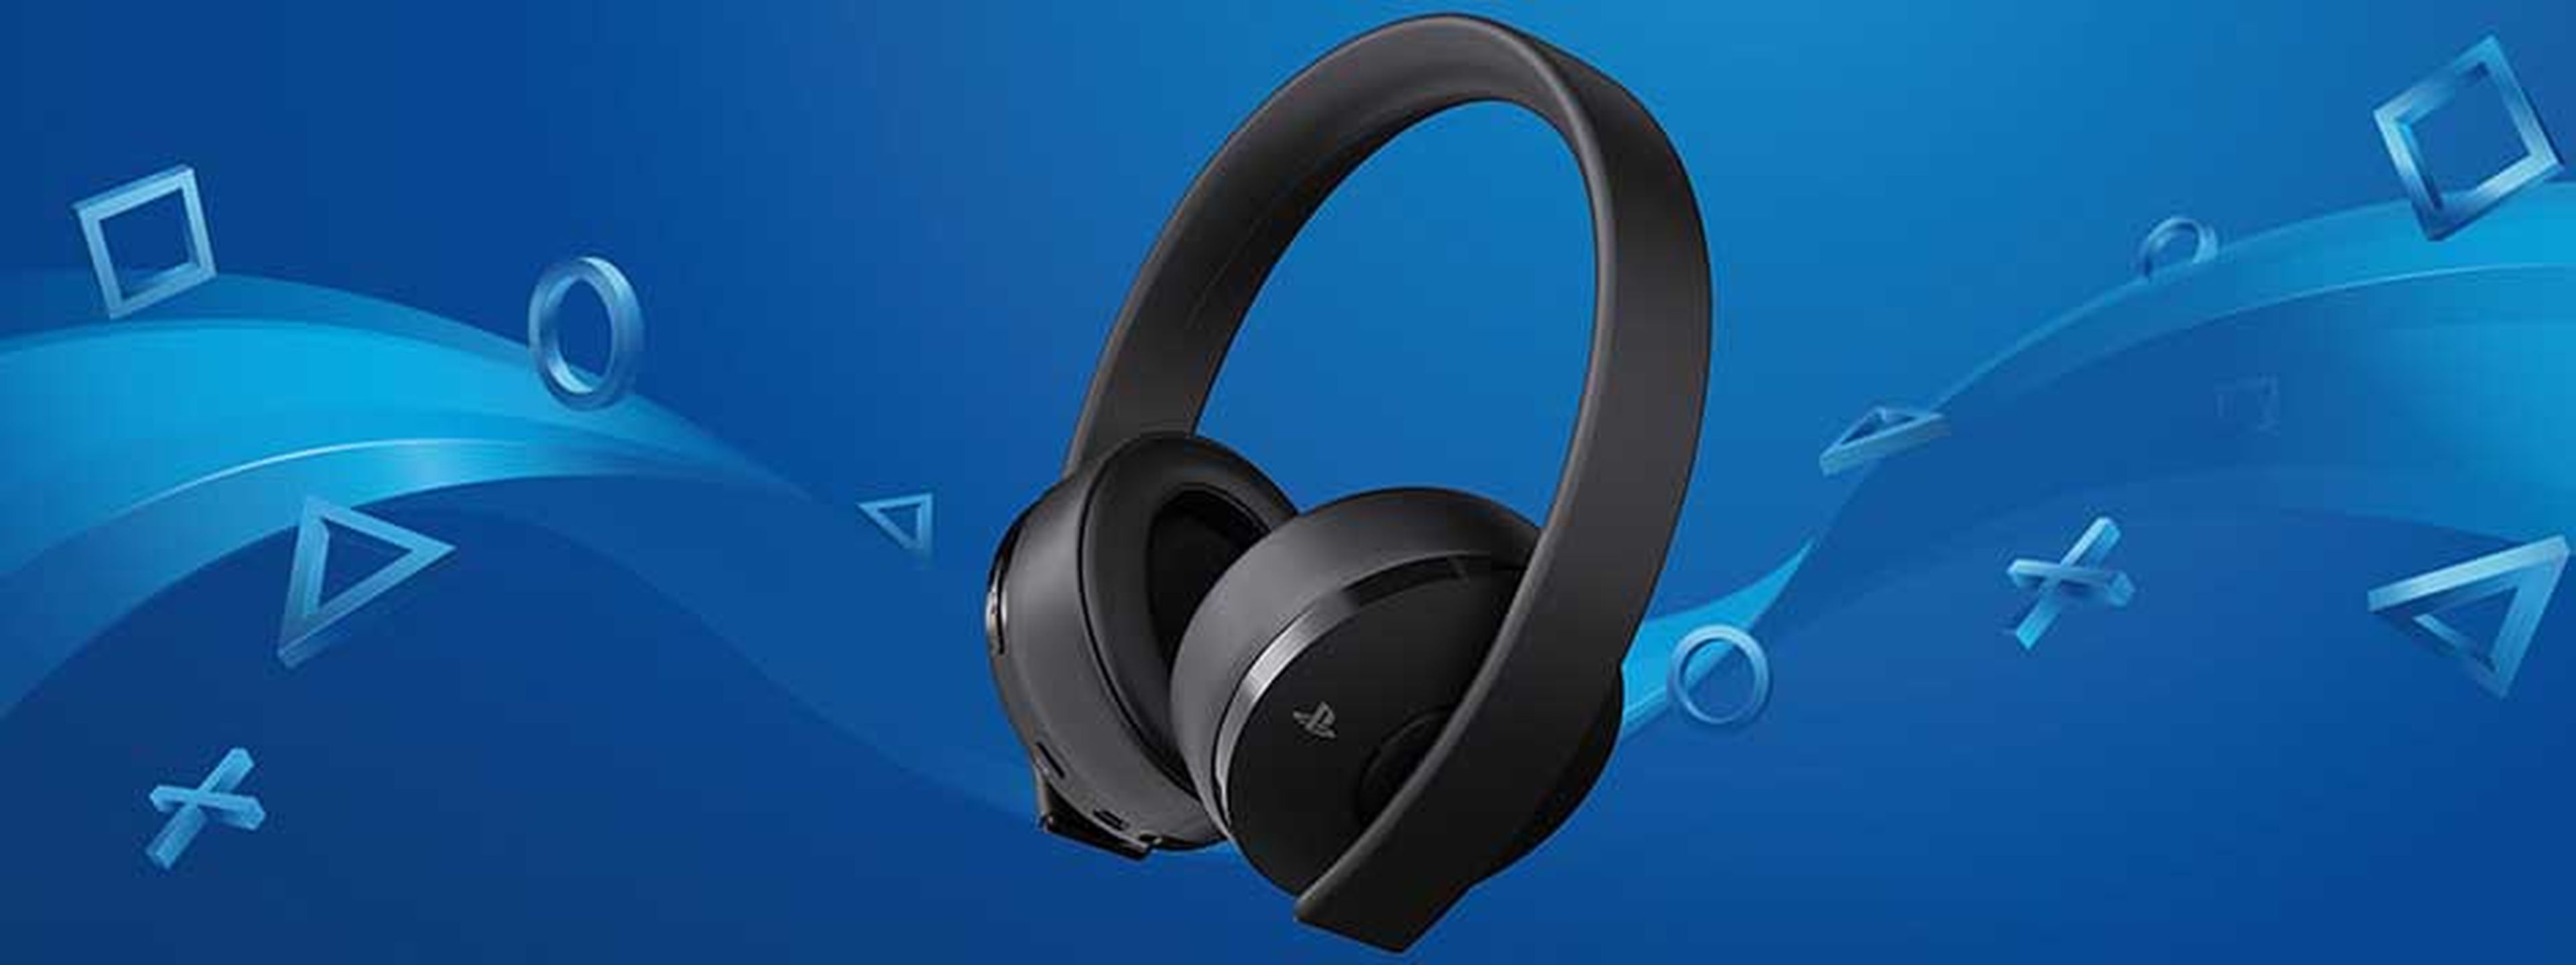 Gold Wireless Headset PS4